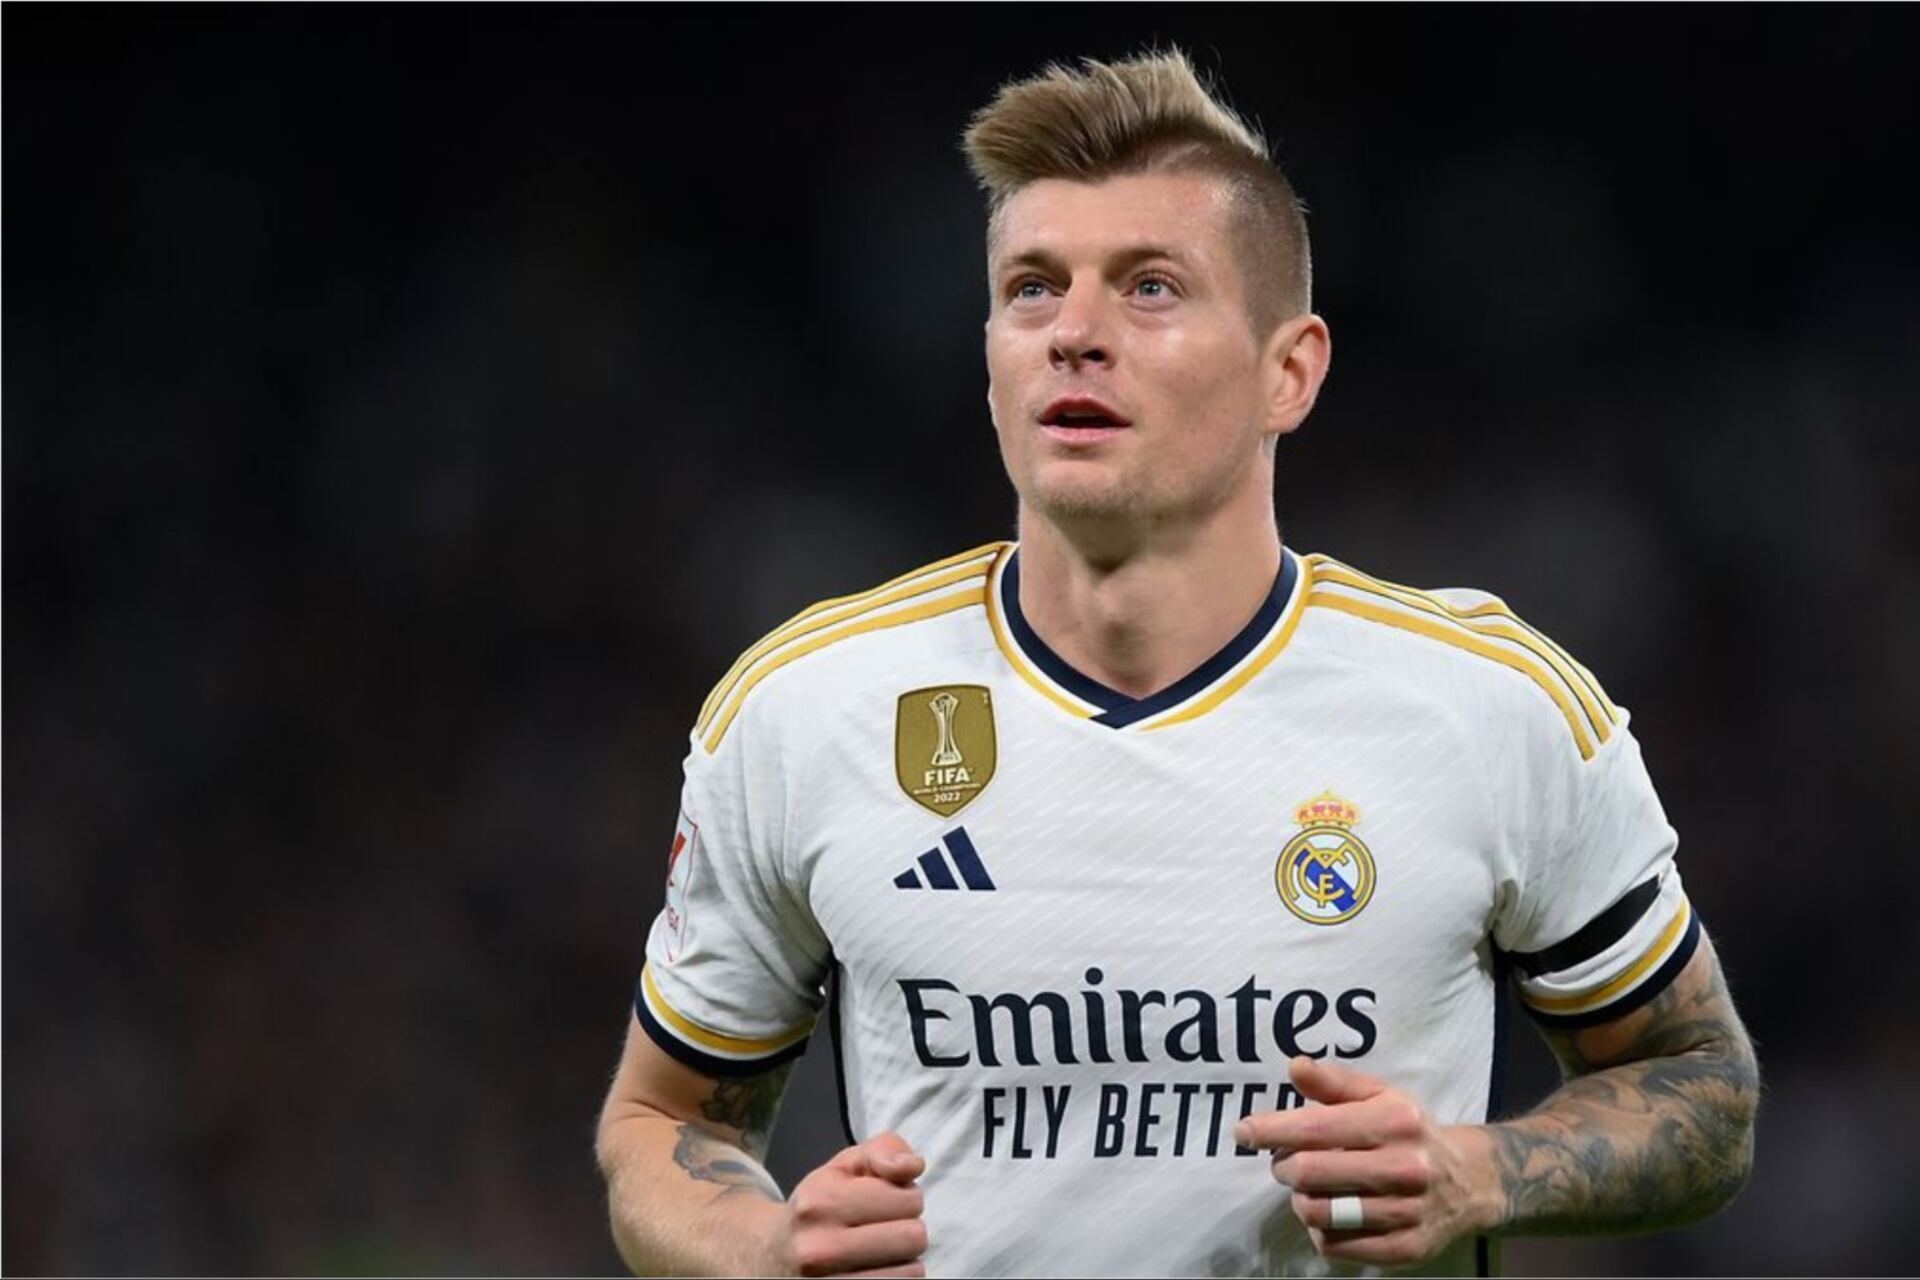 Enemy of Saudi Arabia, the unexpected reason why Toni Kroos is booed during Real Madrid vs Atletico Madrid